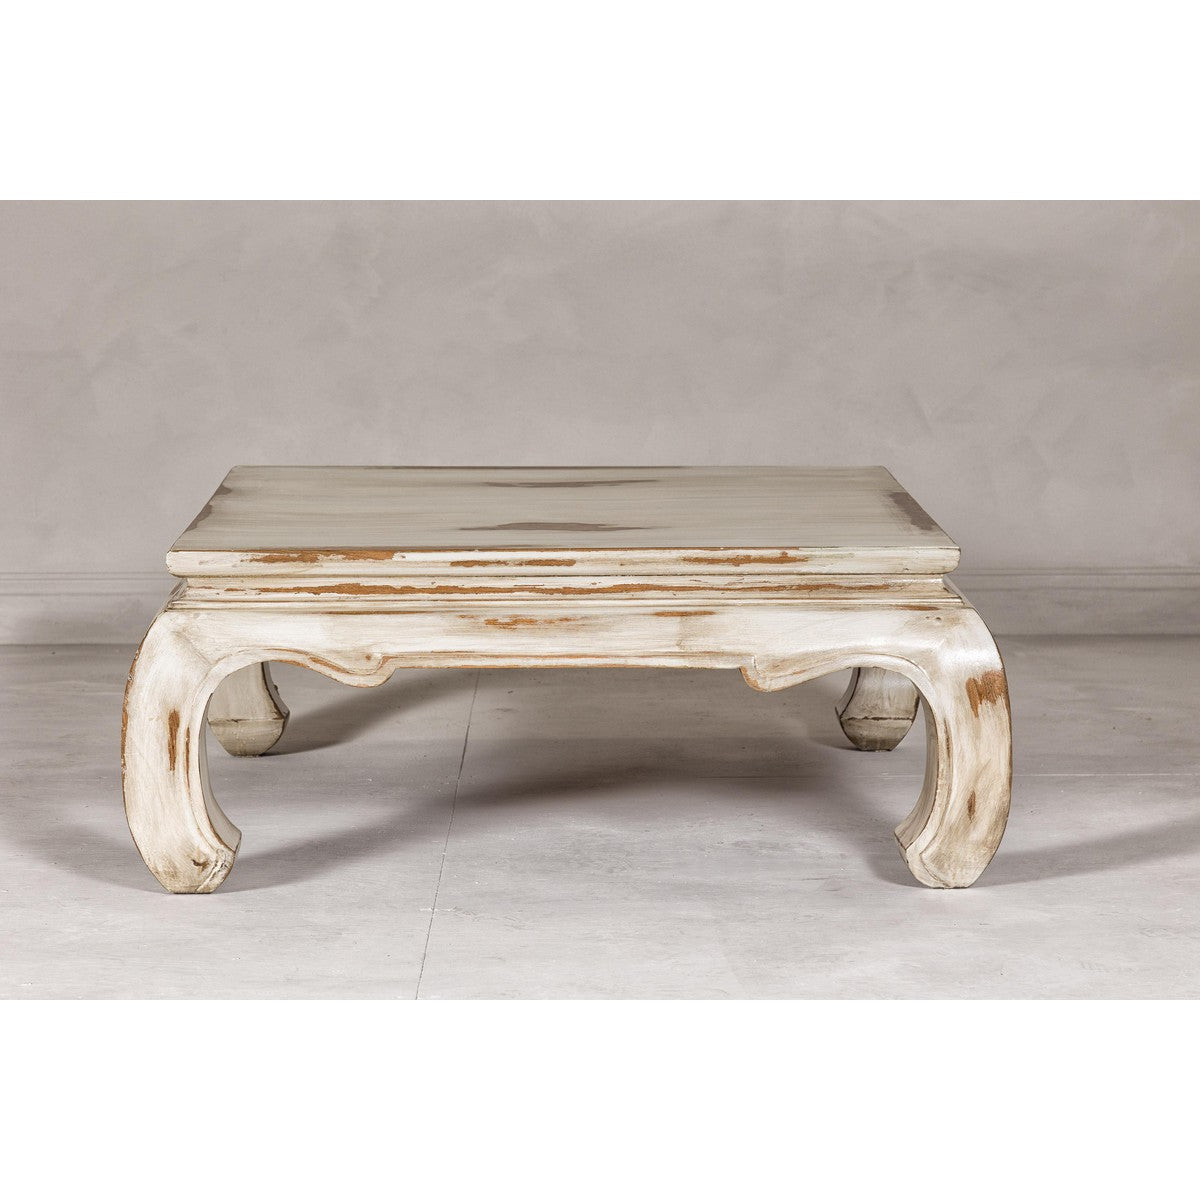 Distressed White Coffee Table with Chow Legs and Square Top, Vintage-YN7957-9. Asian & Chinese Furniture, Art, Antiques, Vintage Home Décor for sale at FEA Home